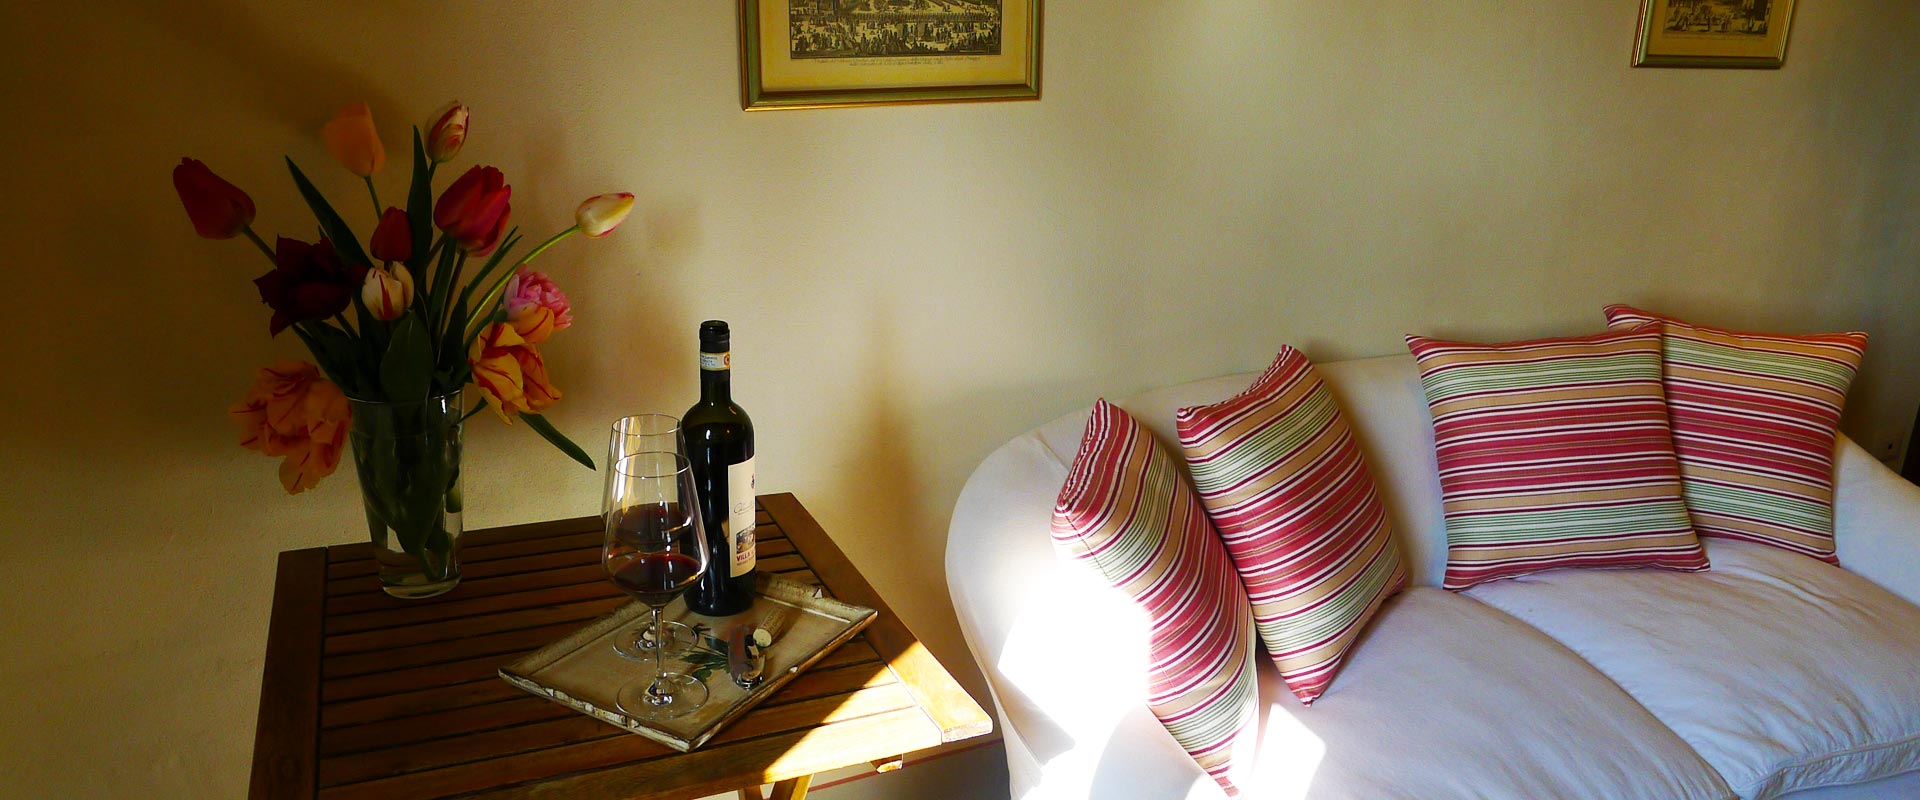 Apartment to rent in Chianti